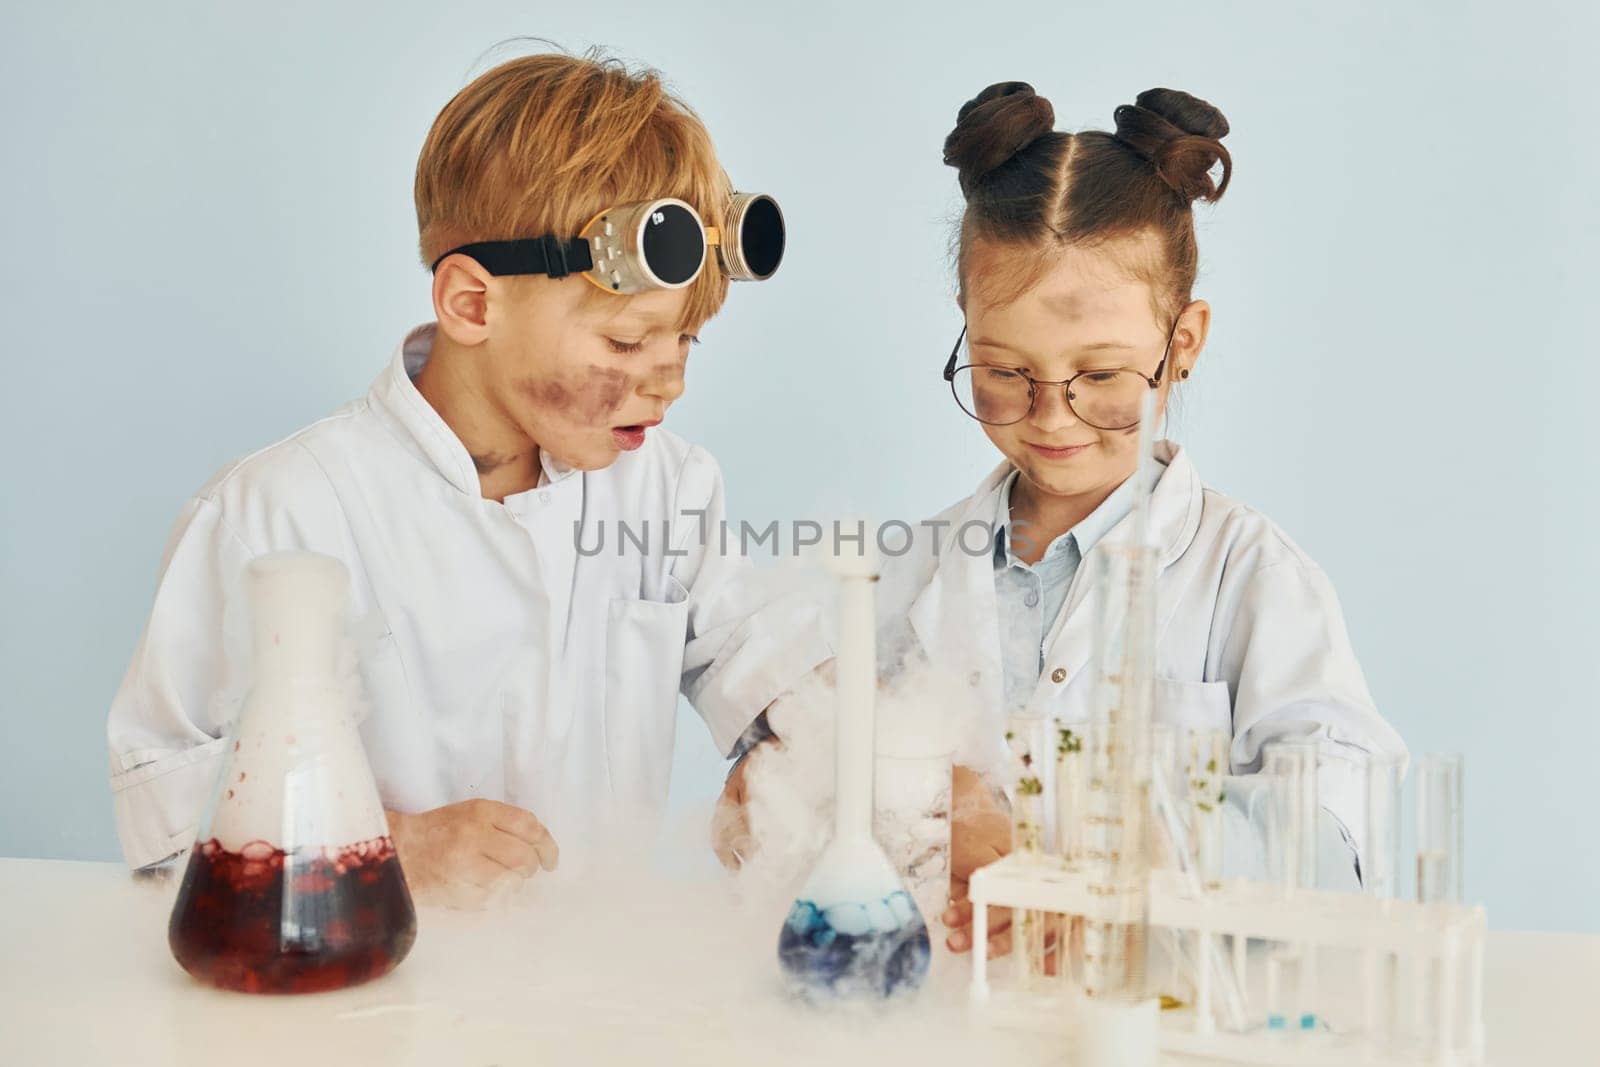 Girl with boy working together. Children in white coats plays a scientists in lab by using equipment.